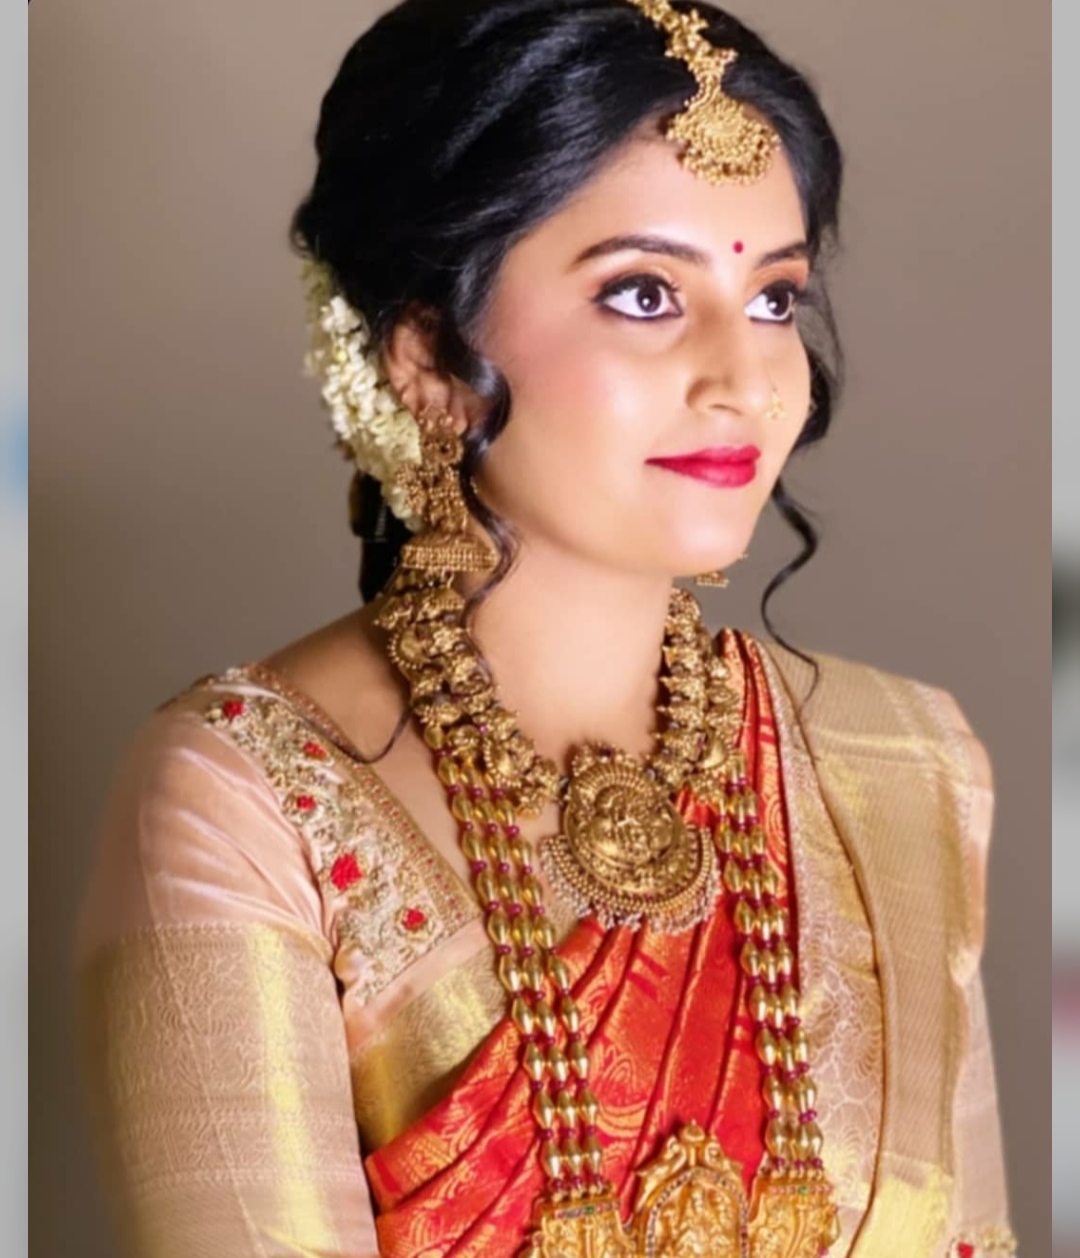 Anitha sanjay Makeup Artist Services, Review and Info - Olready